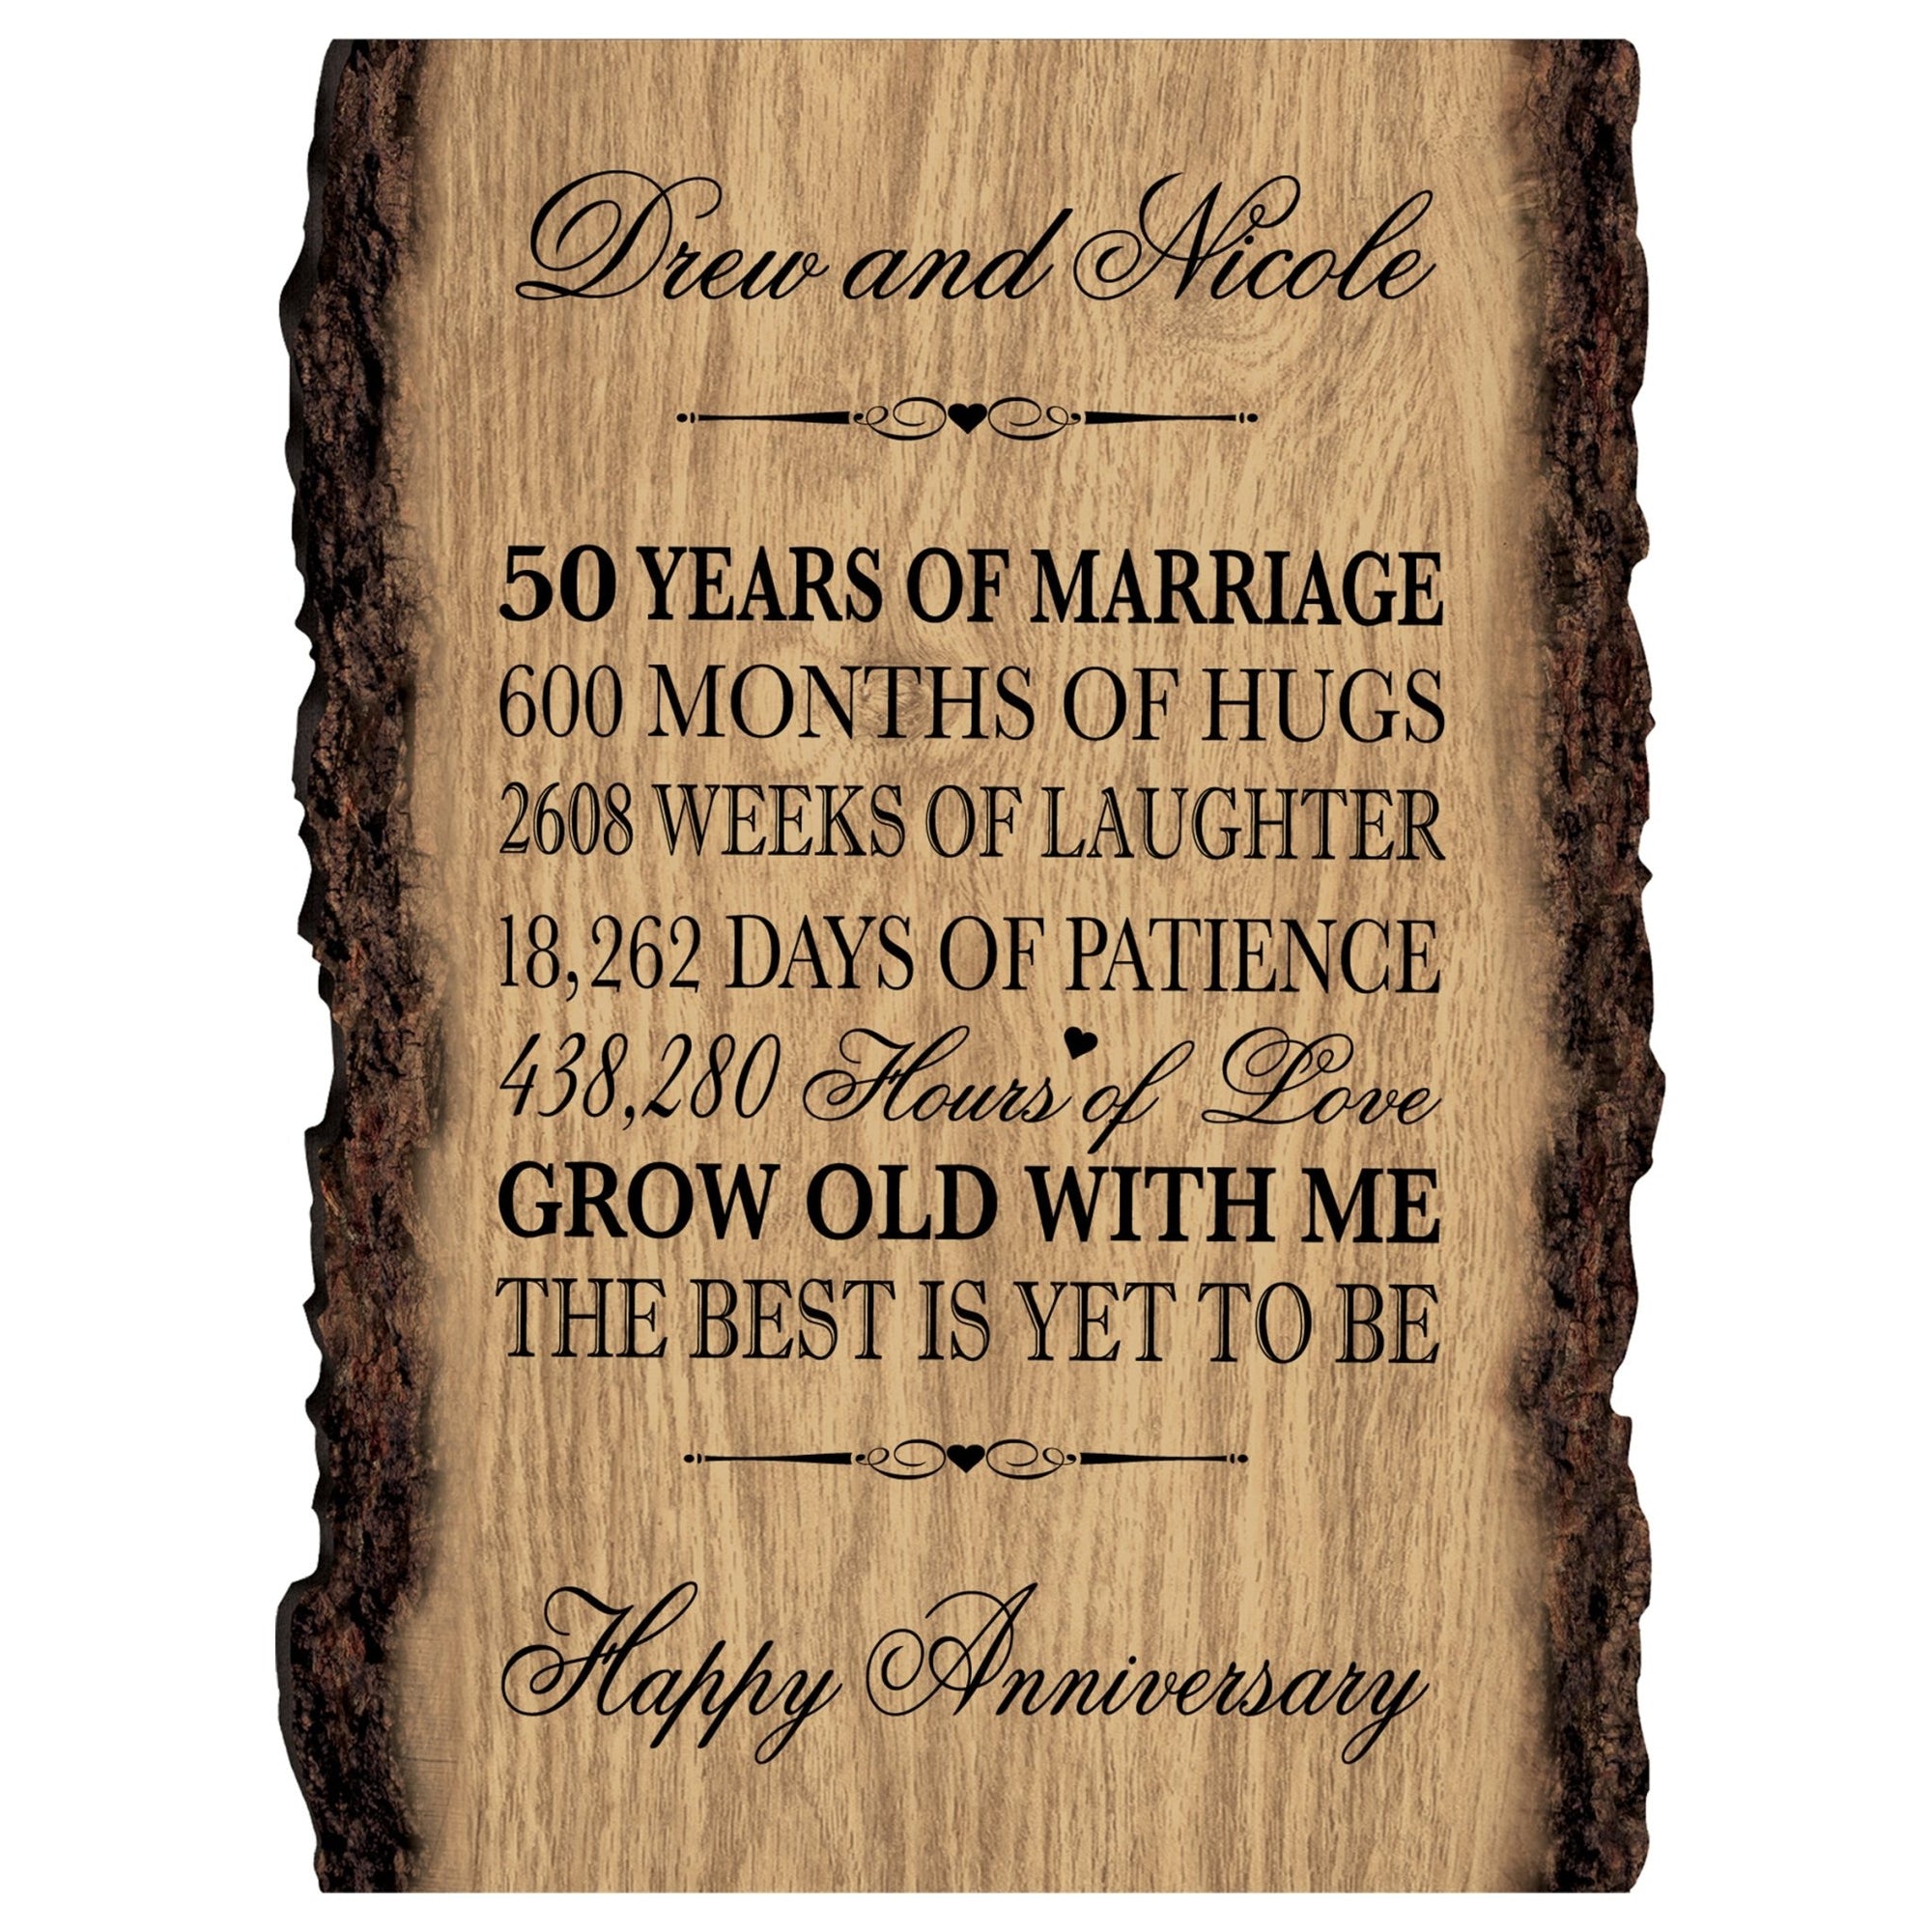 Personalized Wooden Bark Wedding Sign - Our Life Together - LifeSong Milestones